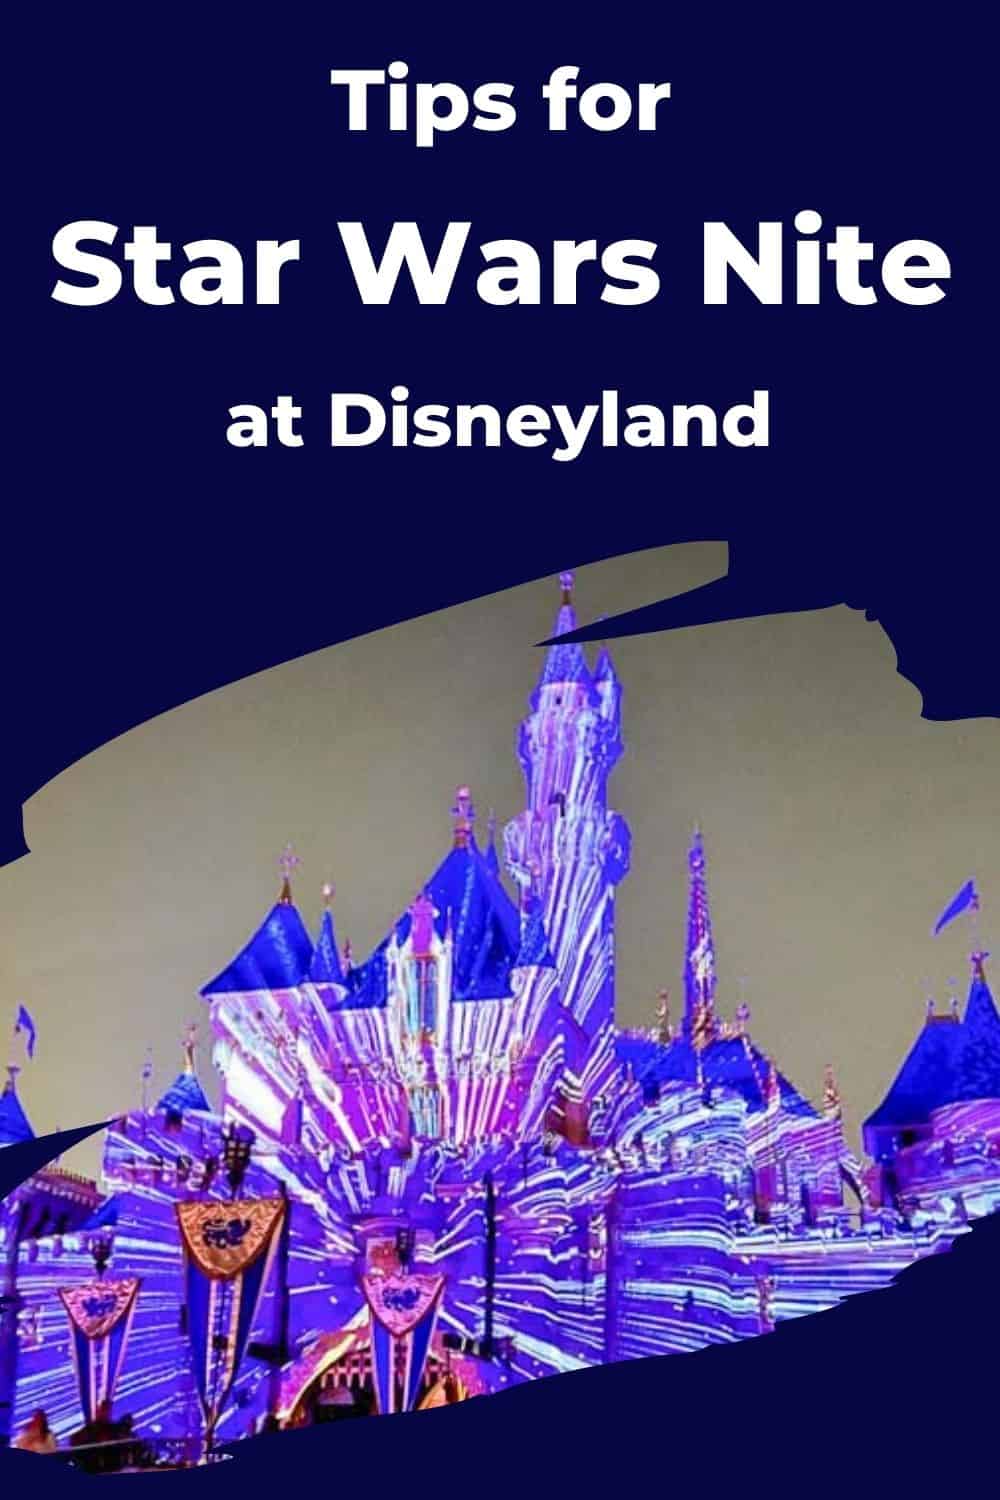 Hyperspace light projections on Sleeping Beauty Castle at Disneyland for Star Wars Nite with dark blue border and text overlay "Tips for Star Wars Nite at Disneyland"